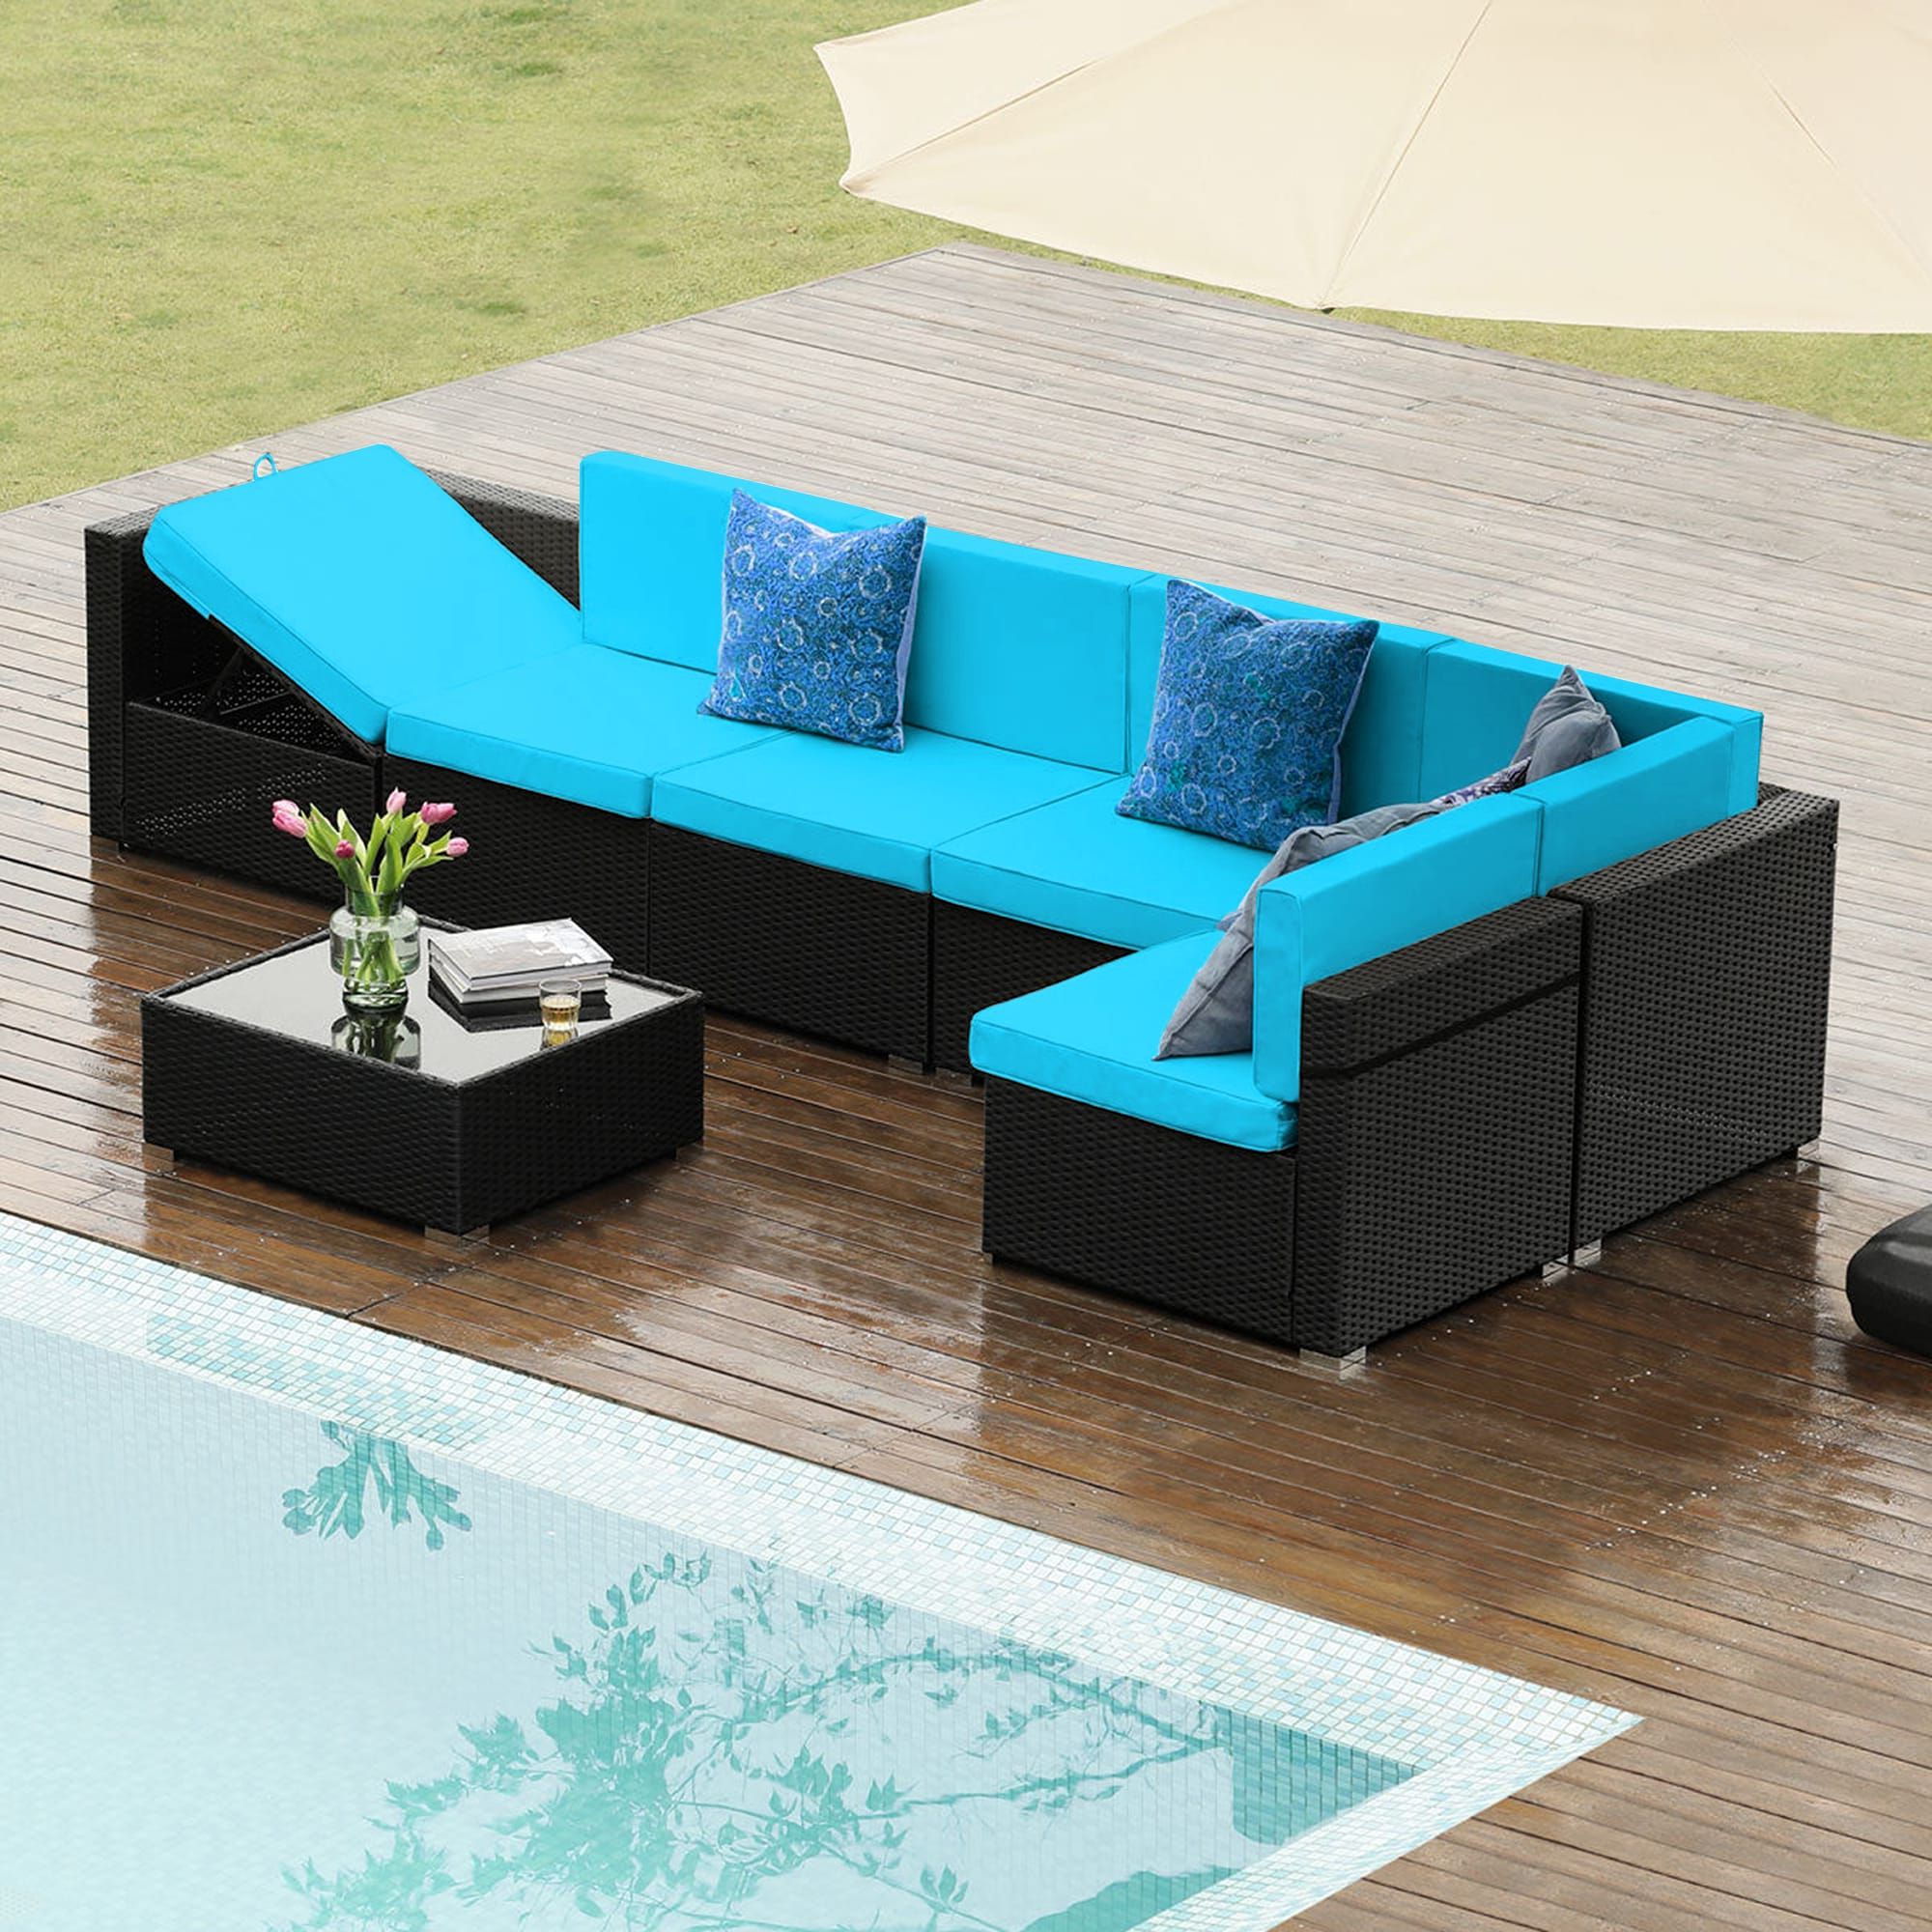 7  Piece Patio Conversation Set Rattan Outdoor Sectional With Blue  Cushion(s) And Iron Frame In The Patio Sectionals & Sofas Department At  Lowes Within Current Side Table Iron Frame Patio Furniture Set (View 12 of 15)